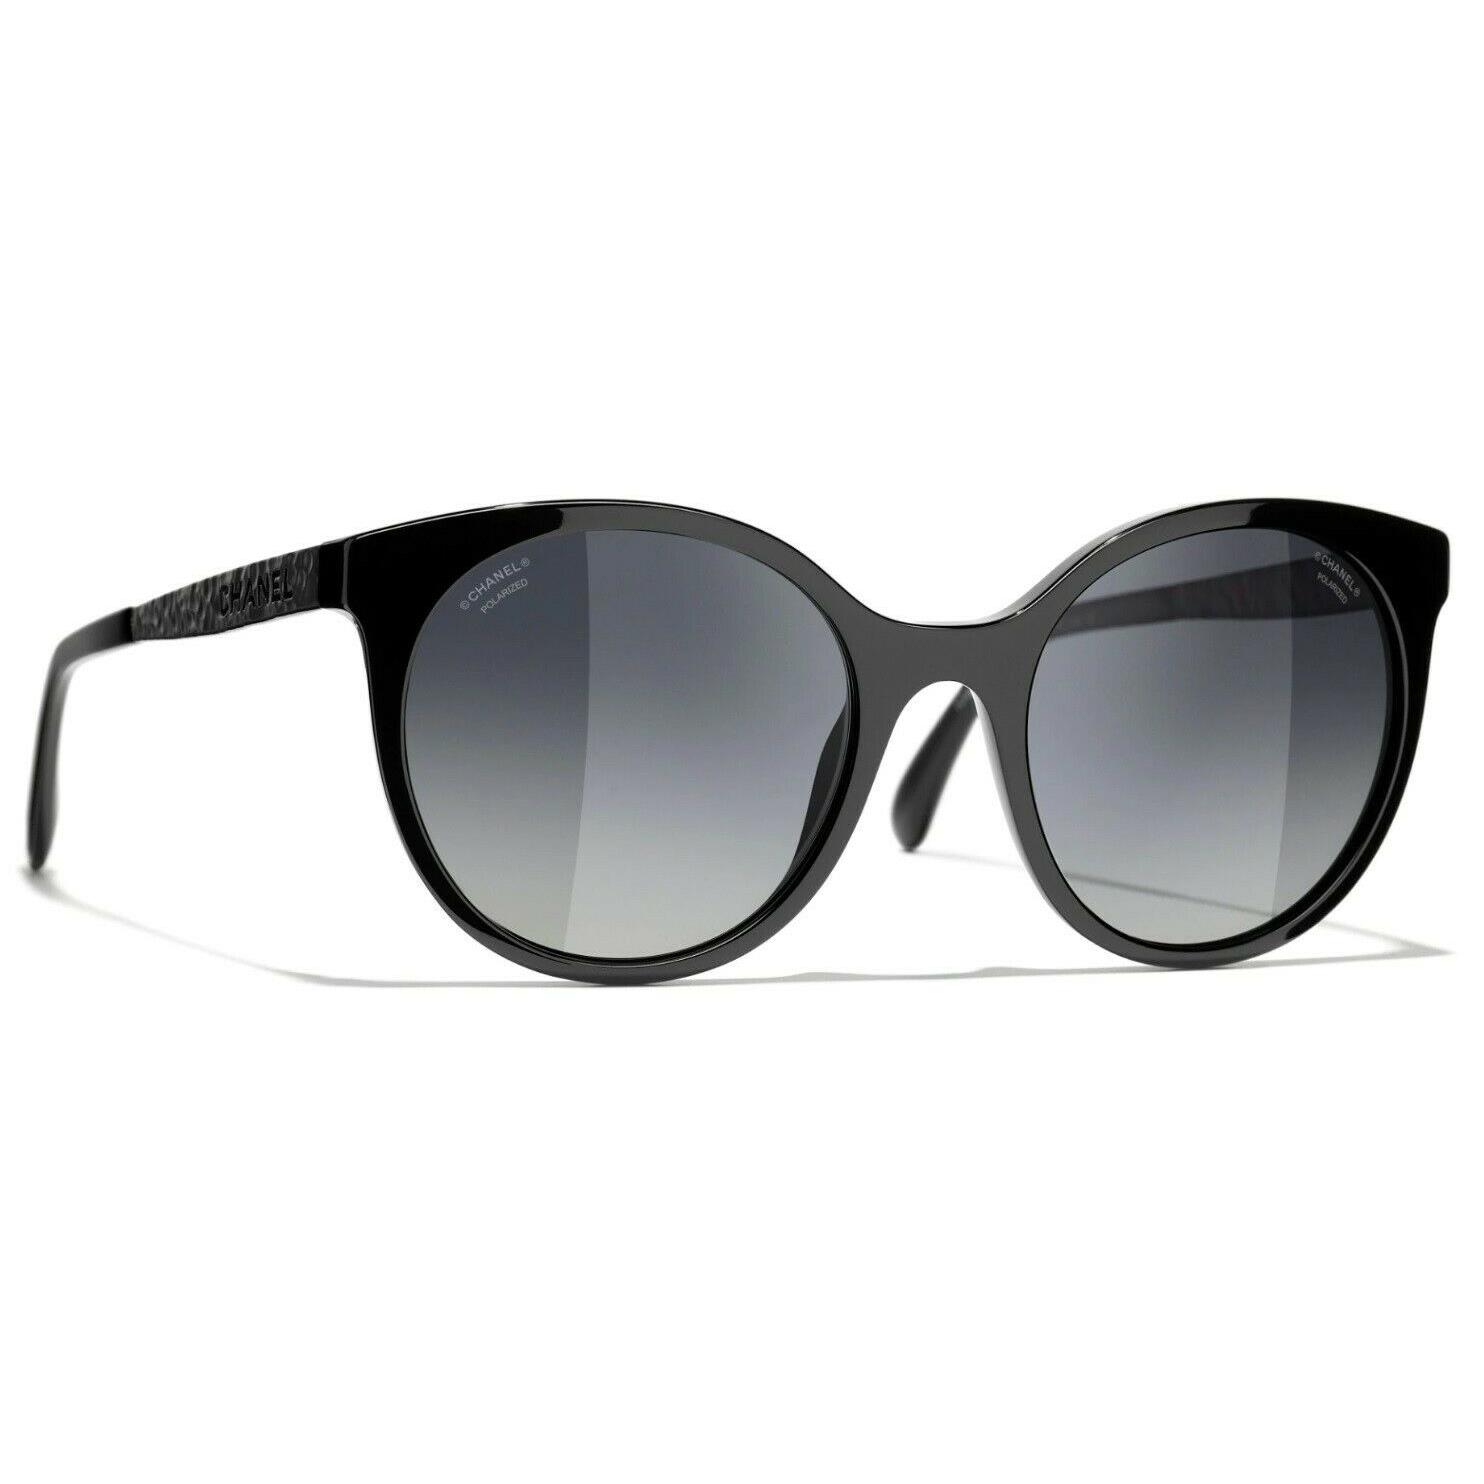 Chanel Pantos 5440-A C888/S8 Sunglasses Black/grey -made in Italy